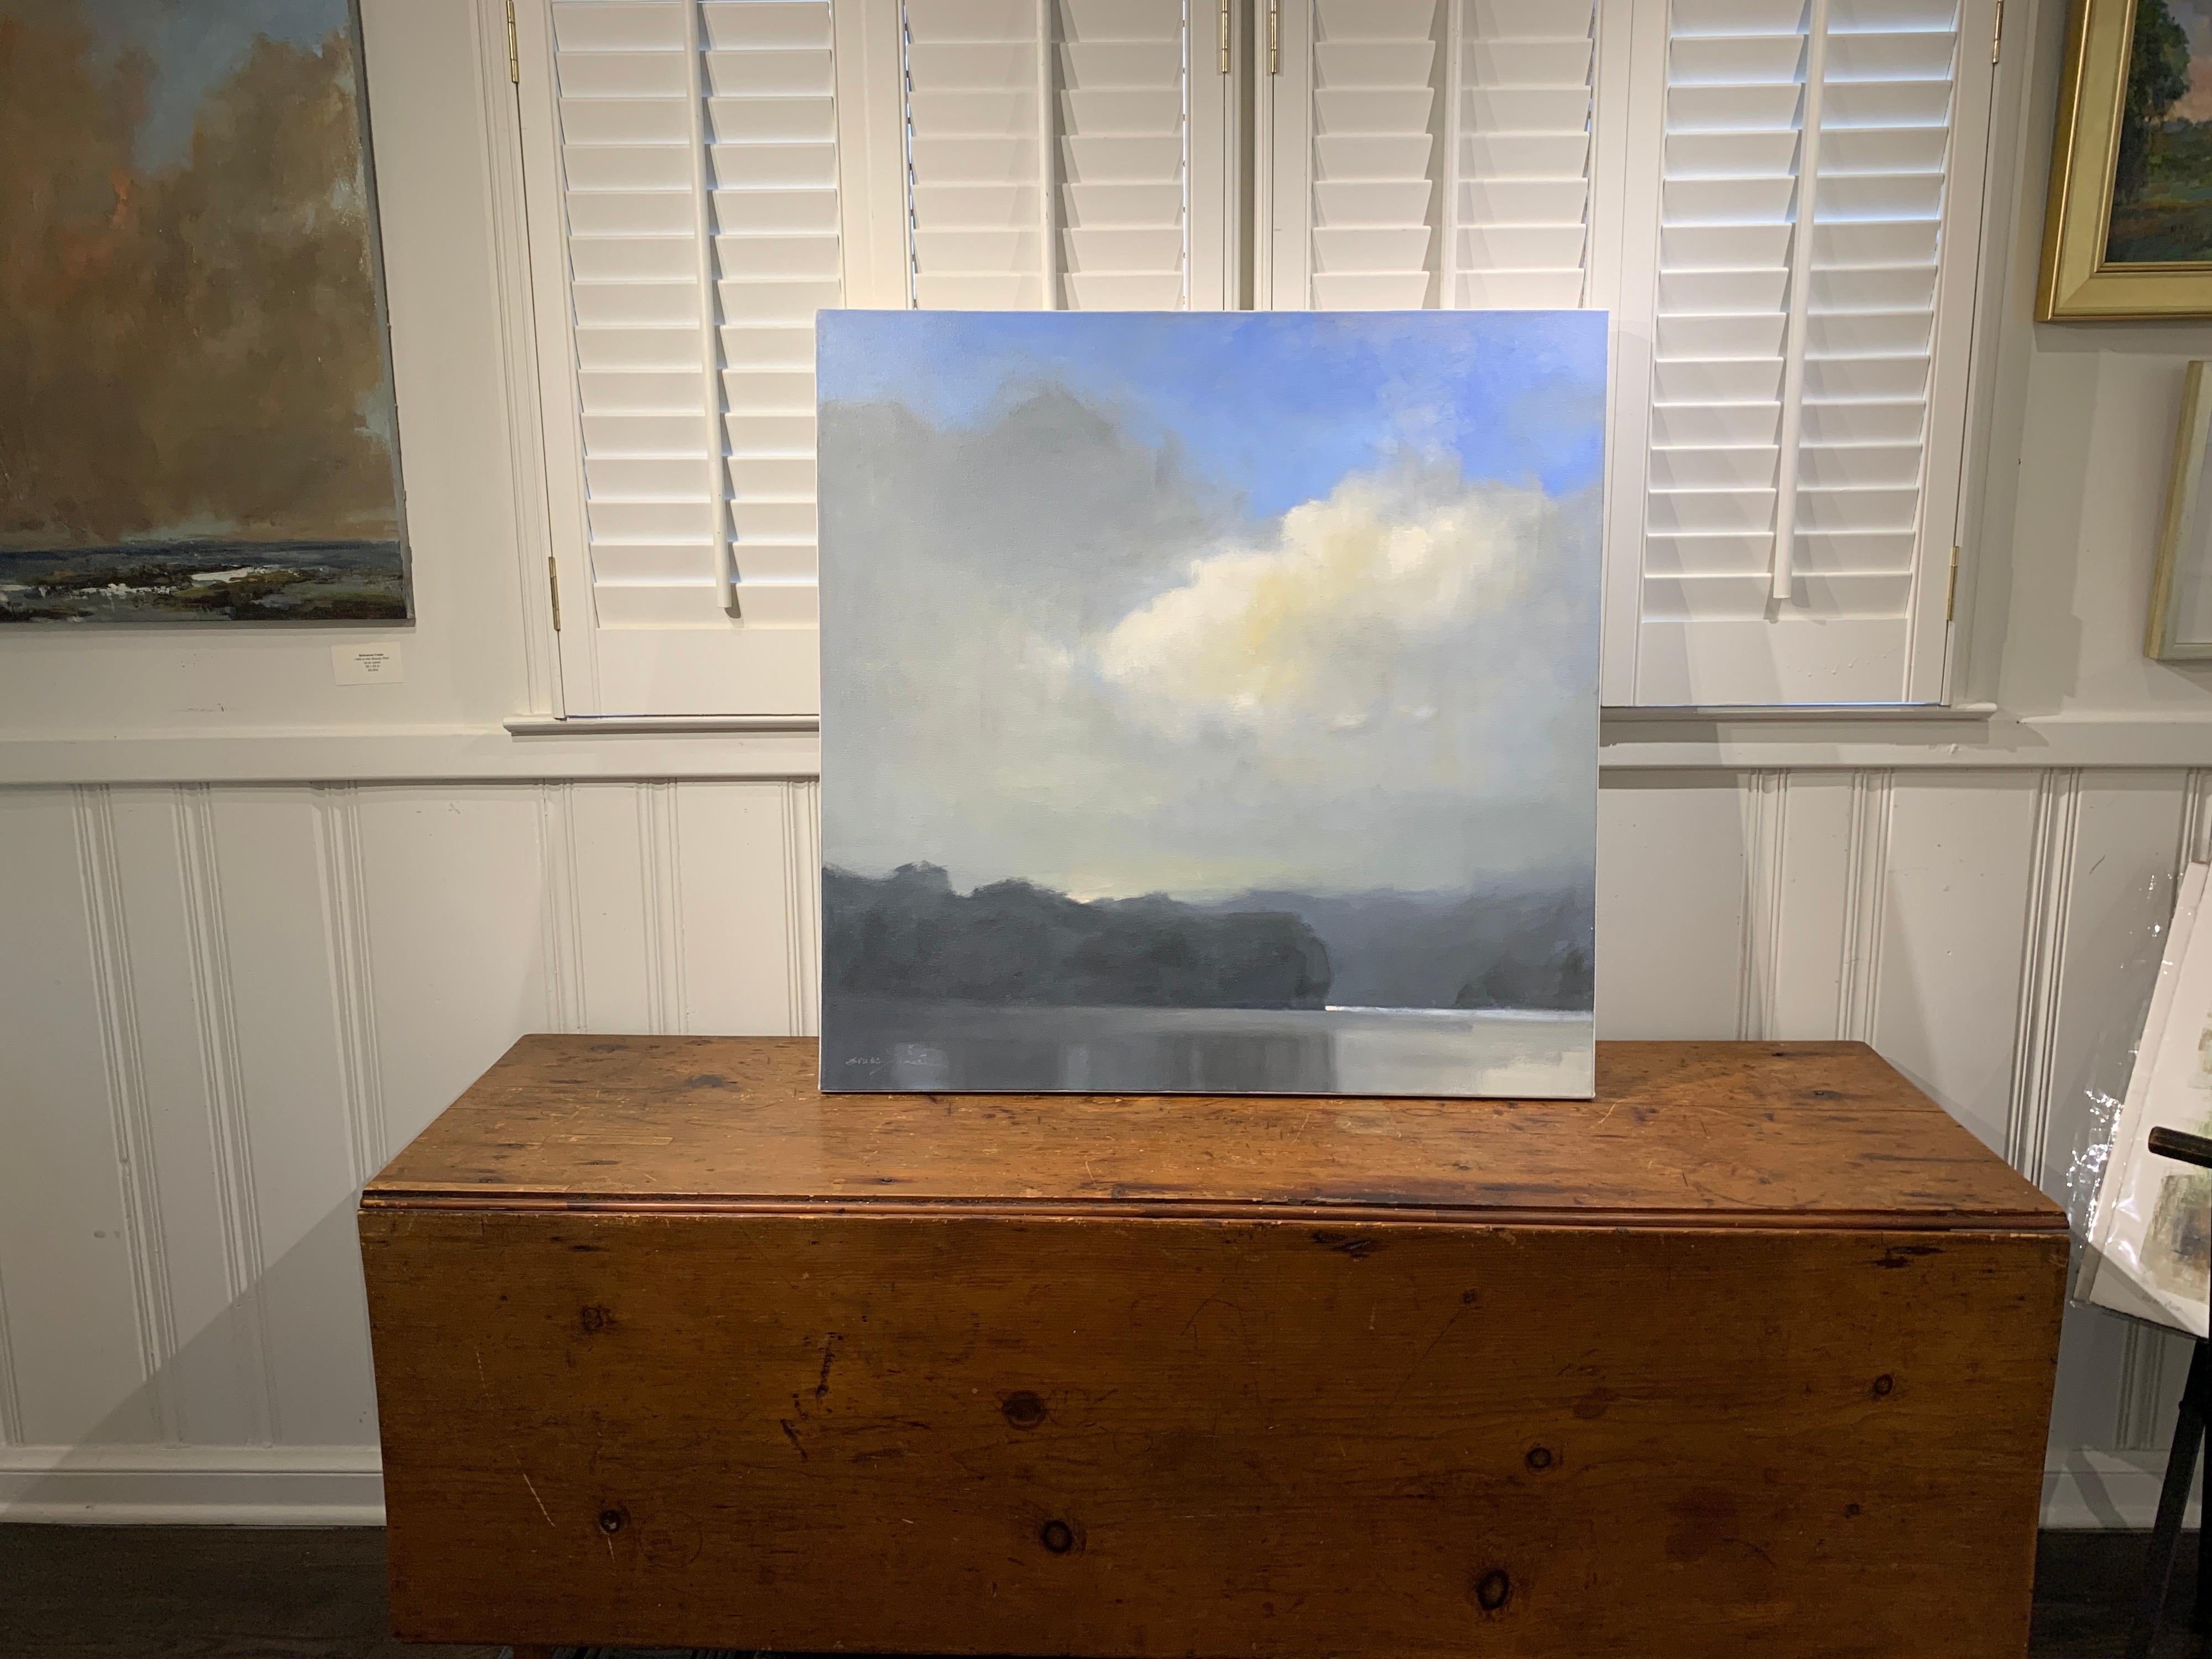 Sherrie Russ Levine is an artist noted for her paintings that capture the play of light and color as it appears in nature, and provide a welcome respite from the hectic environment of modern life. Her moody landscapes are more about the essence of a